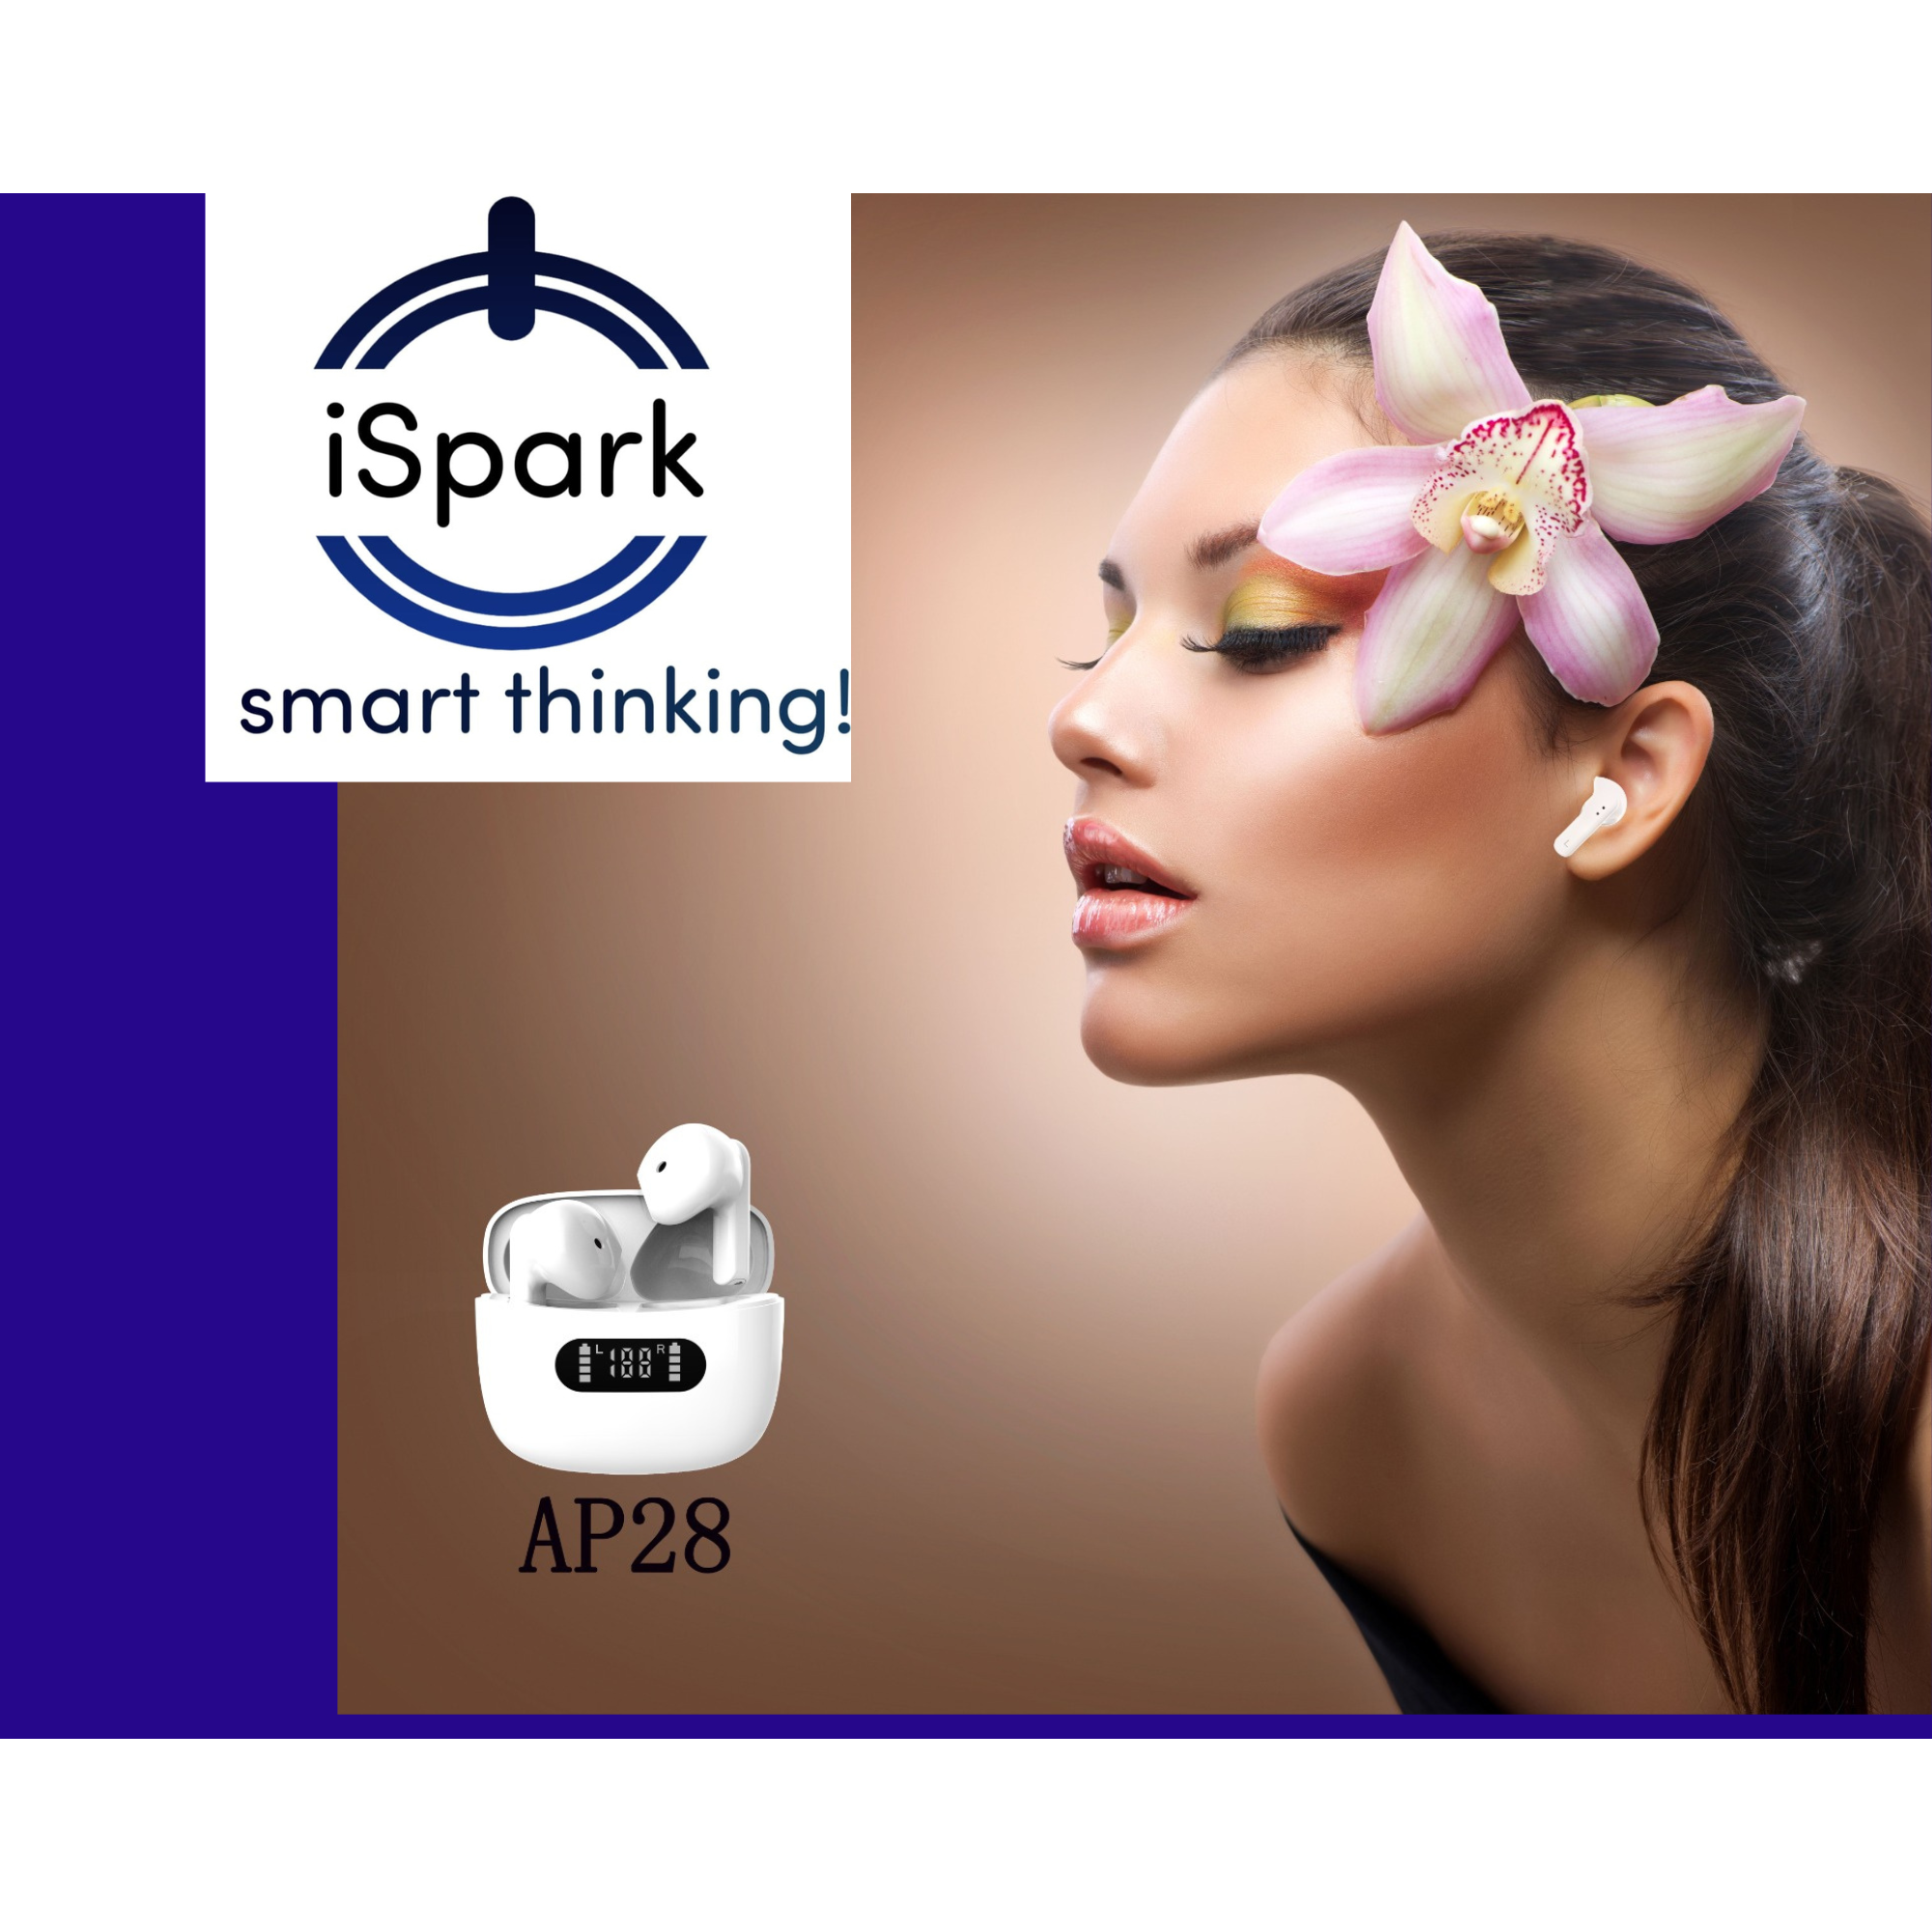 iSpark Mini Bluetooth earphones AP28 Pro 5.3 Bluetooth  for music & calls fast connection,long range, ENC noise cancellation compatible with iPhone & all smartphones with led digital display - iSpark 